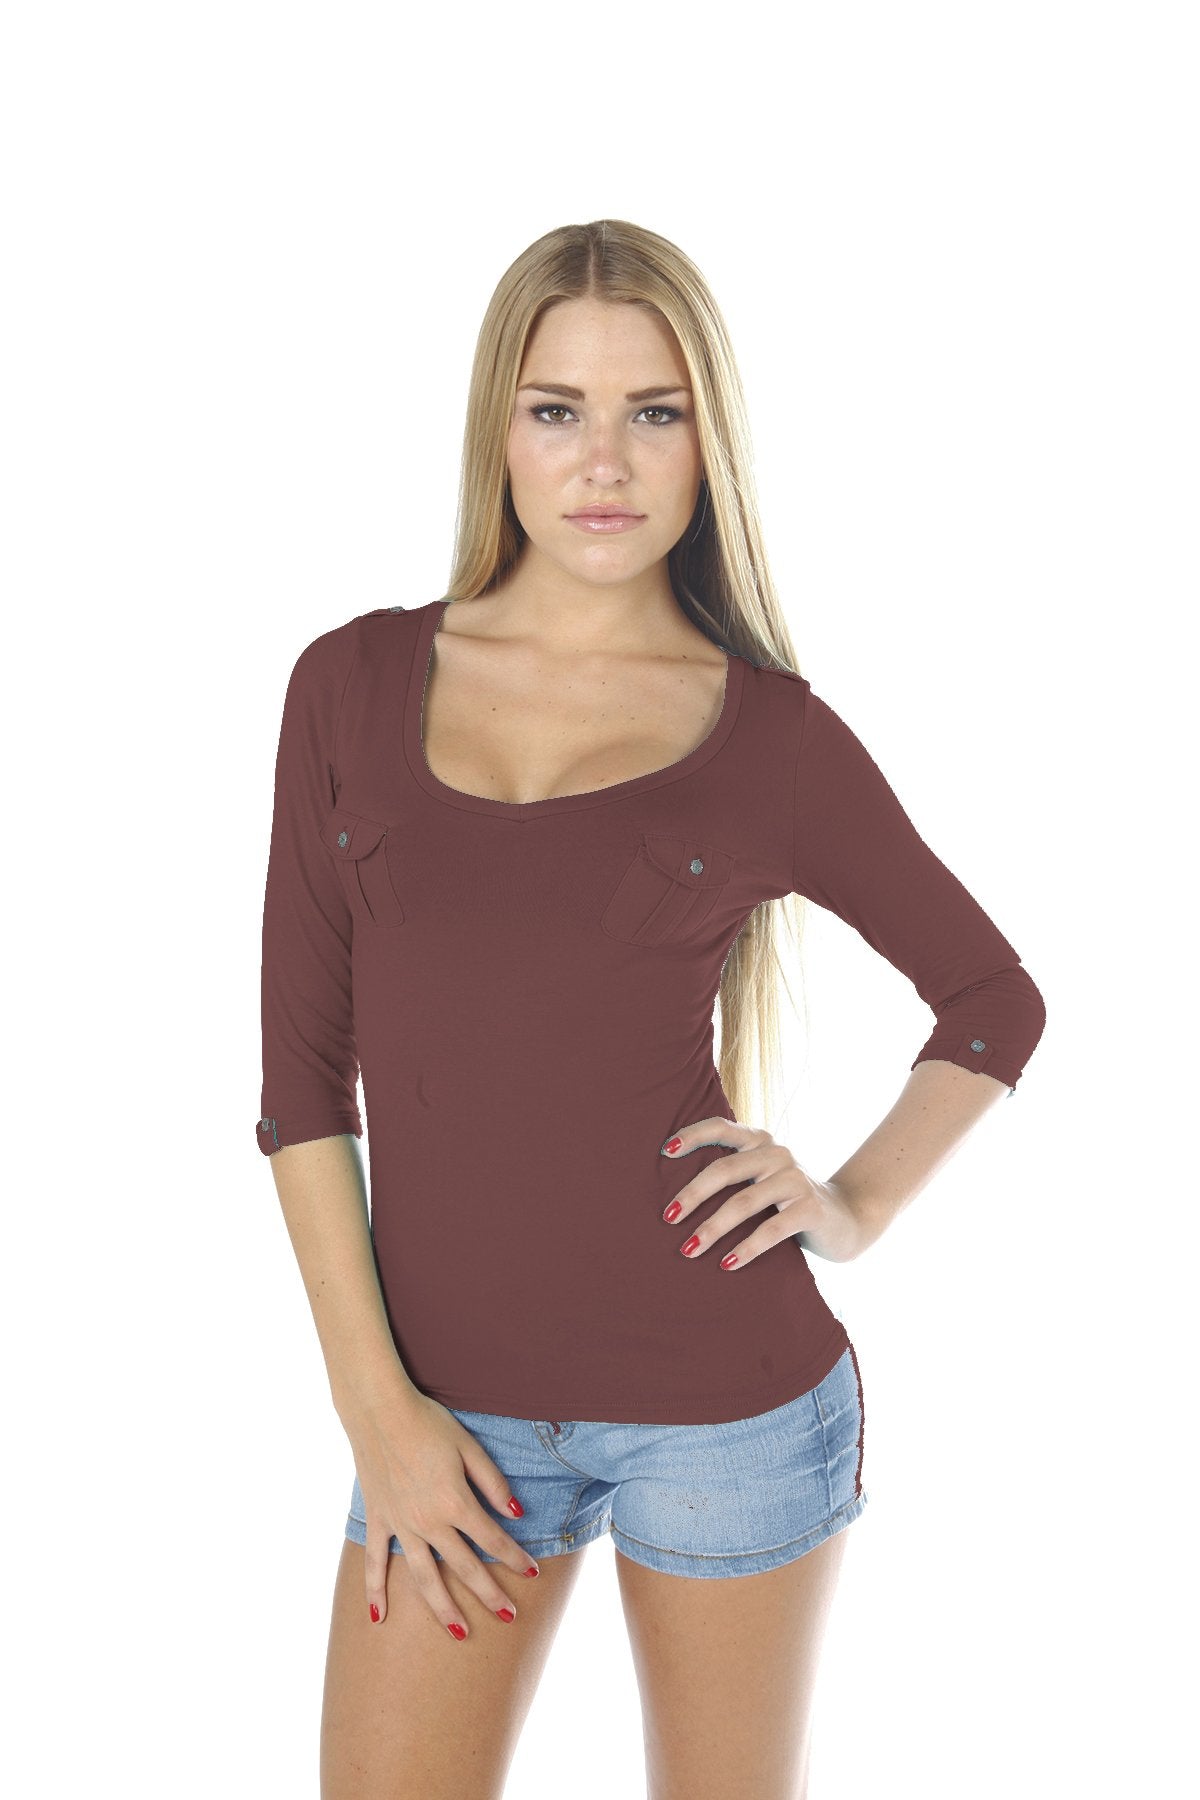 Hollywood Star Fashion Women's 3/4 Sleeves Cotton Top with 2 Pockets in Front